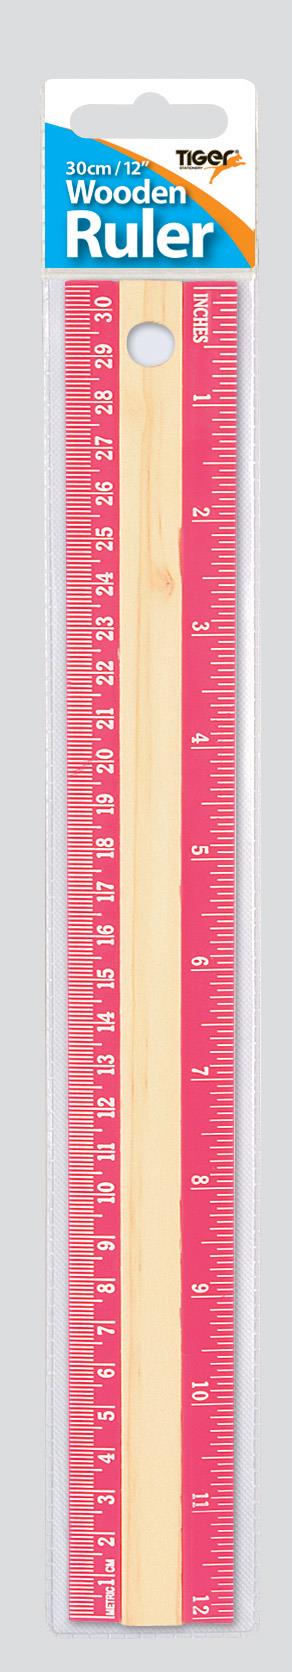 30cm Wooden Ruler Assorted Colours